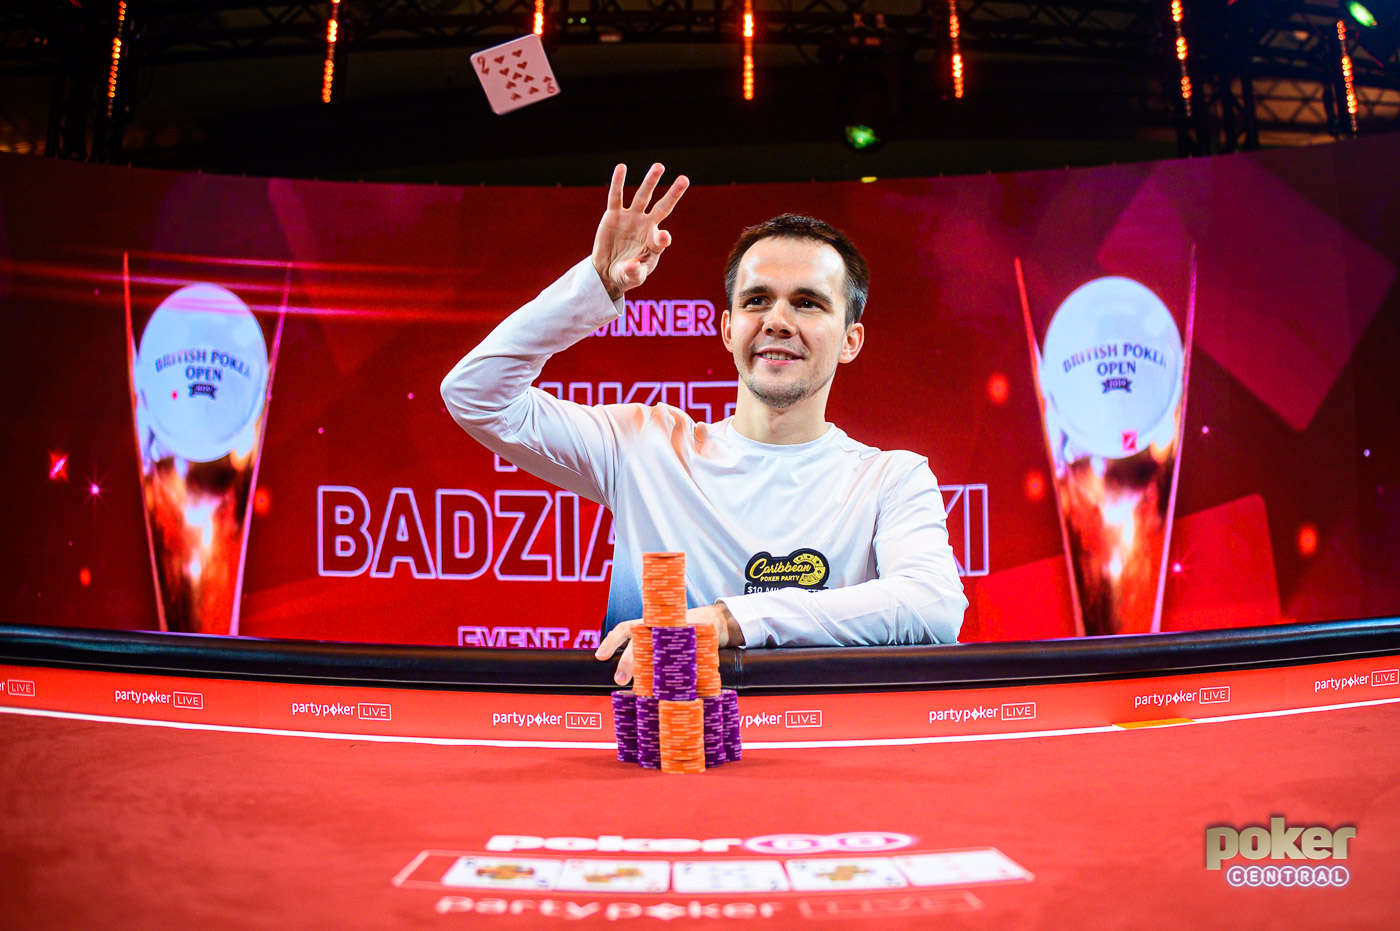 Mikita Badziakouski throws his winning cards in the air after winning Event #9 of the British Poker Open.